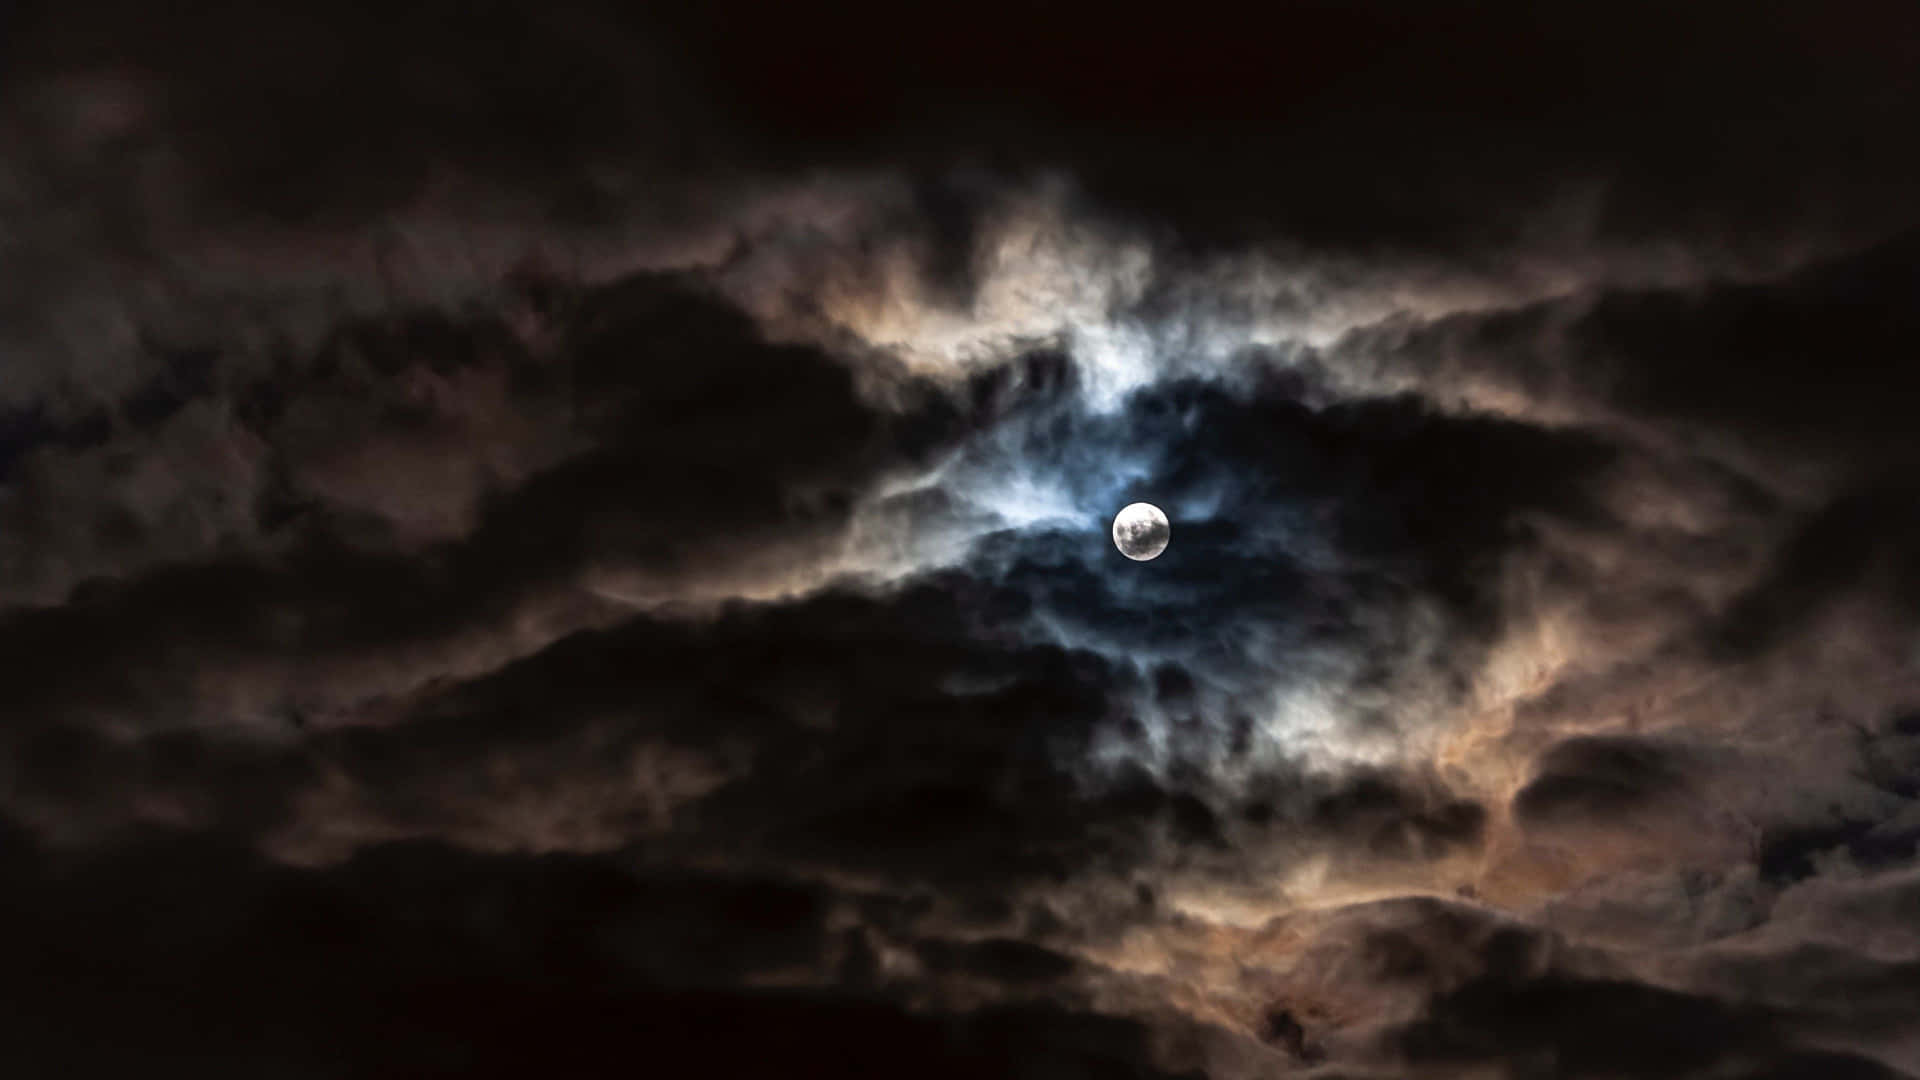 the moon is seen through the clouds